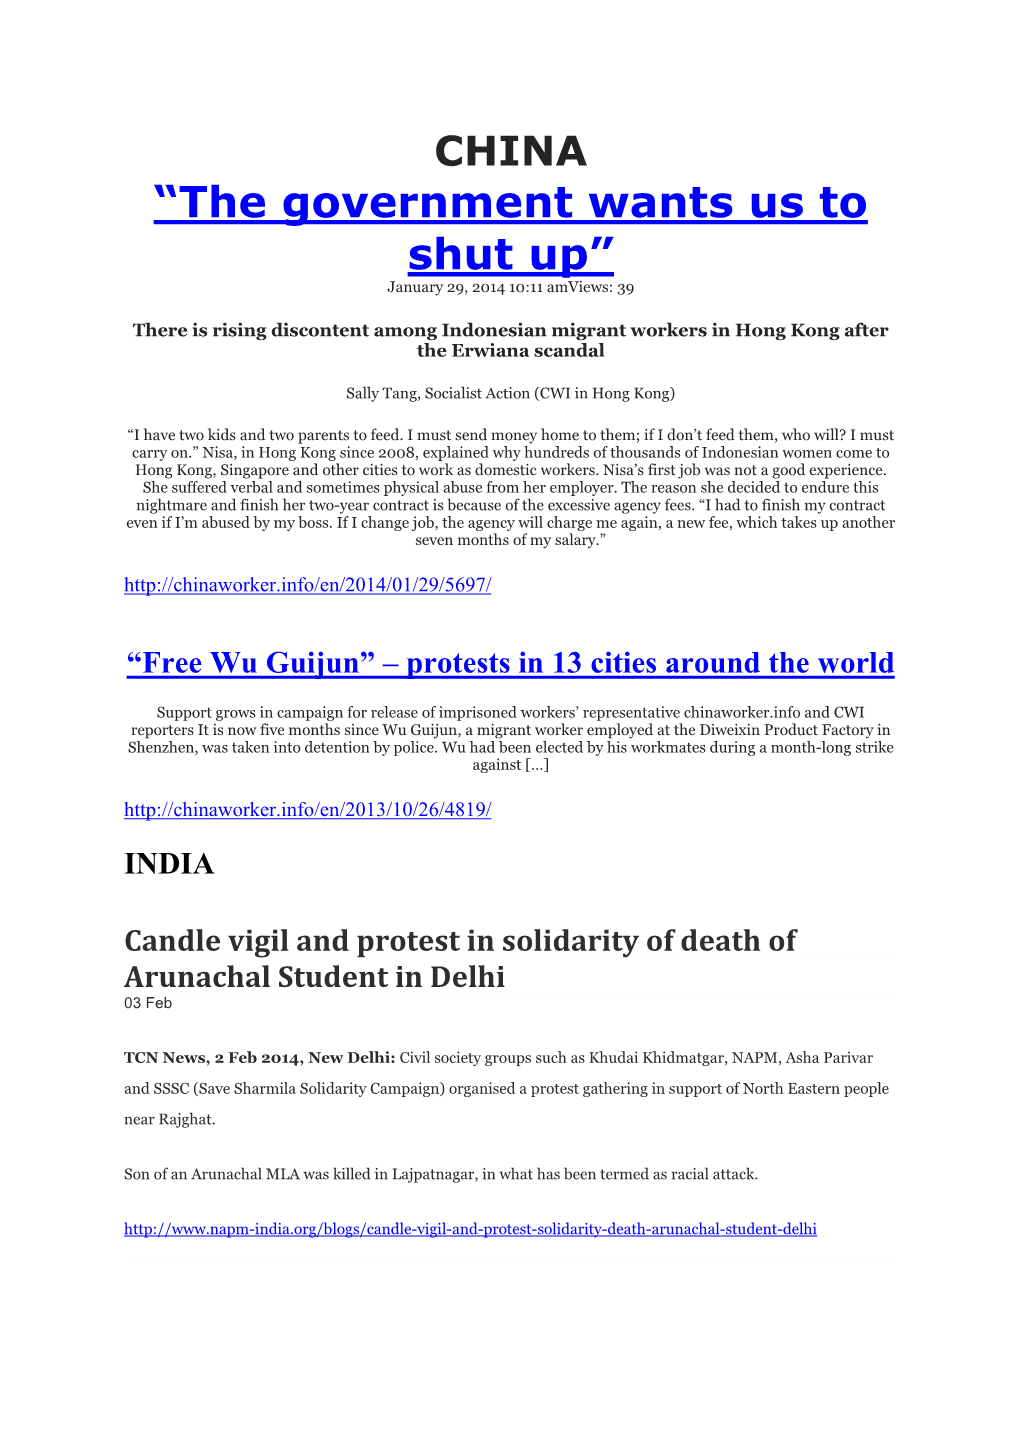 “The Government Wants Us to Shut Up” January 29, 2014 10:11 Amviews: 39